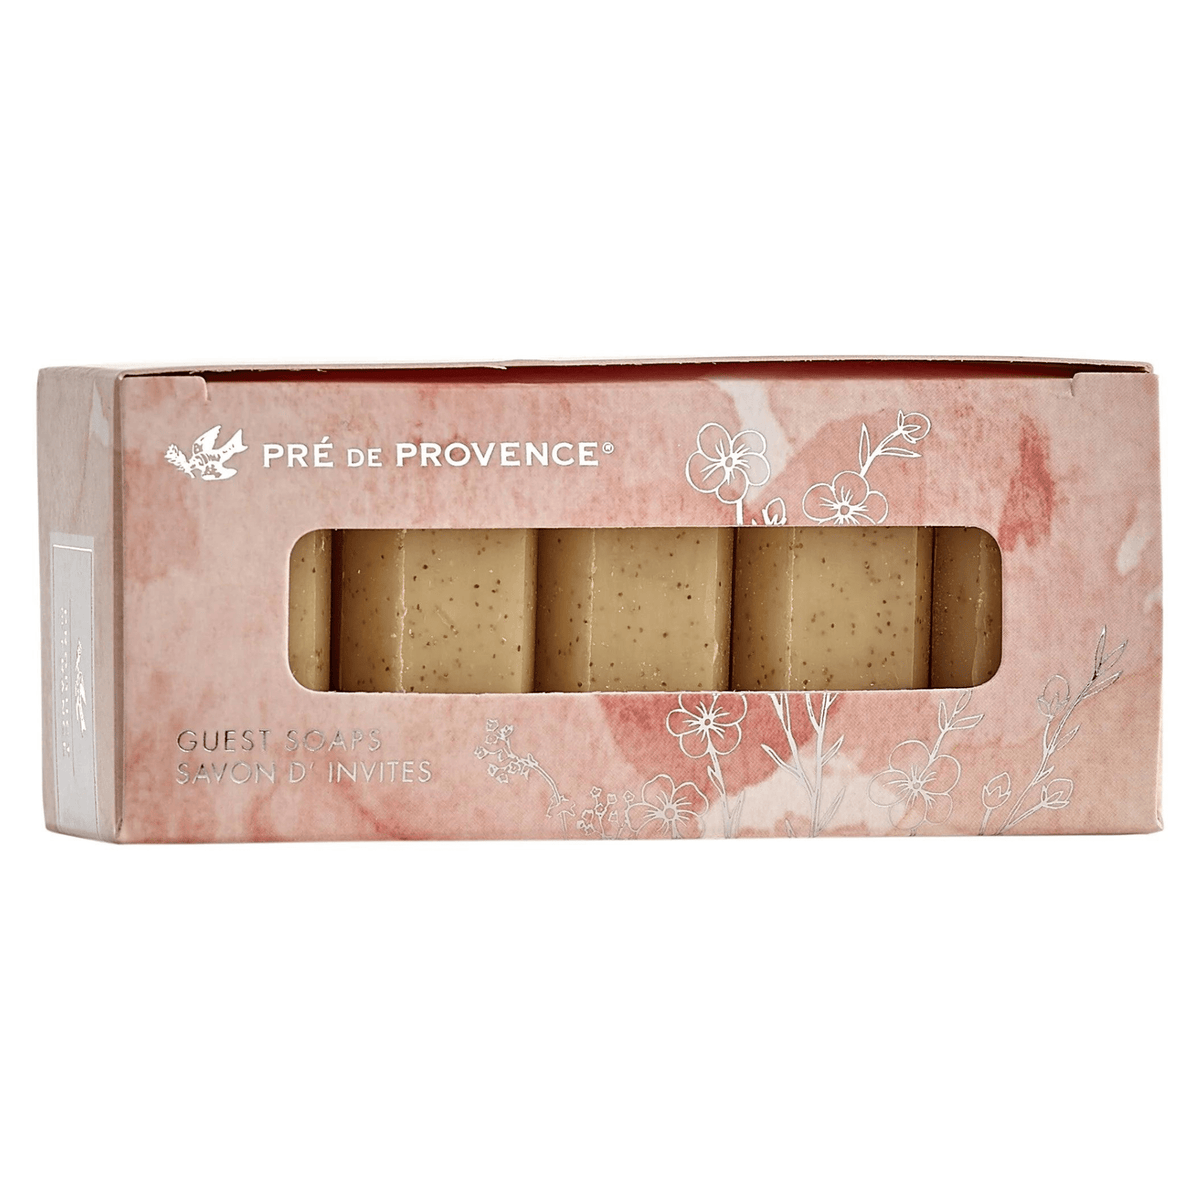 Primary Image of Honey Almond 5 Pack of Soap